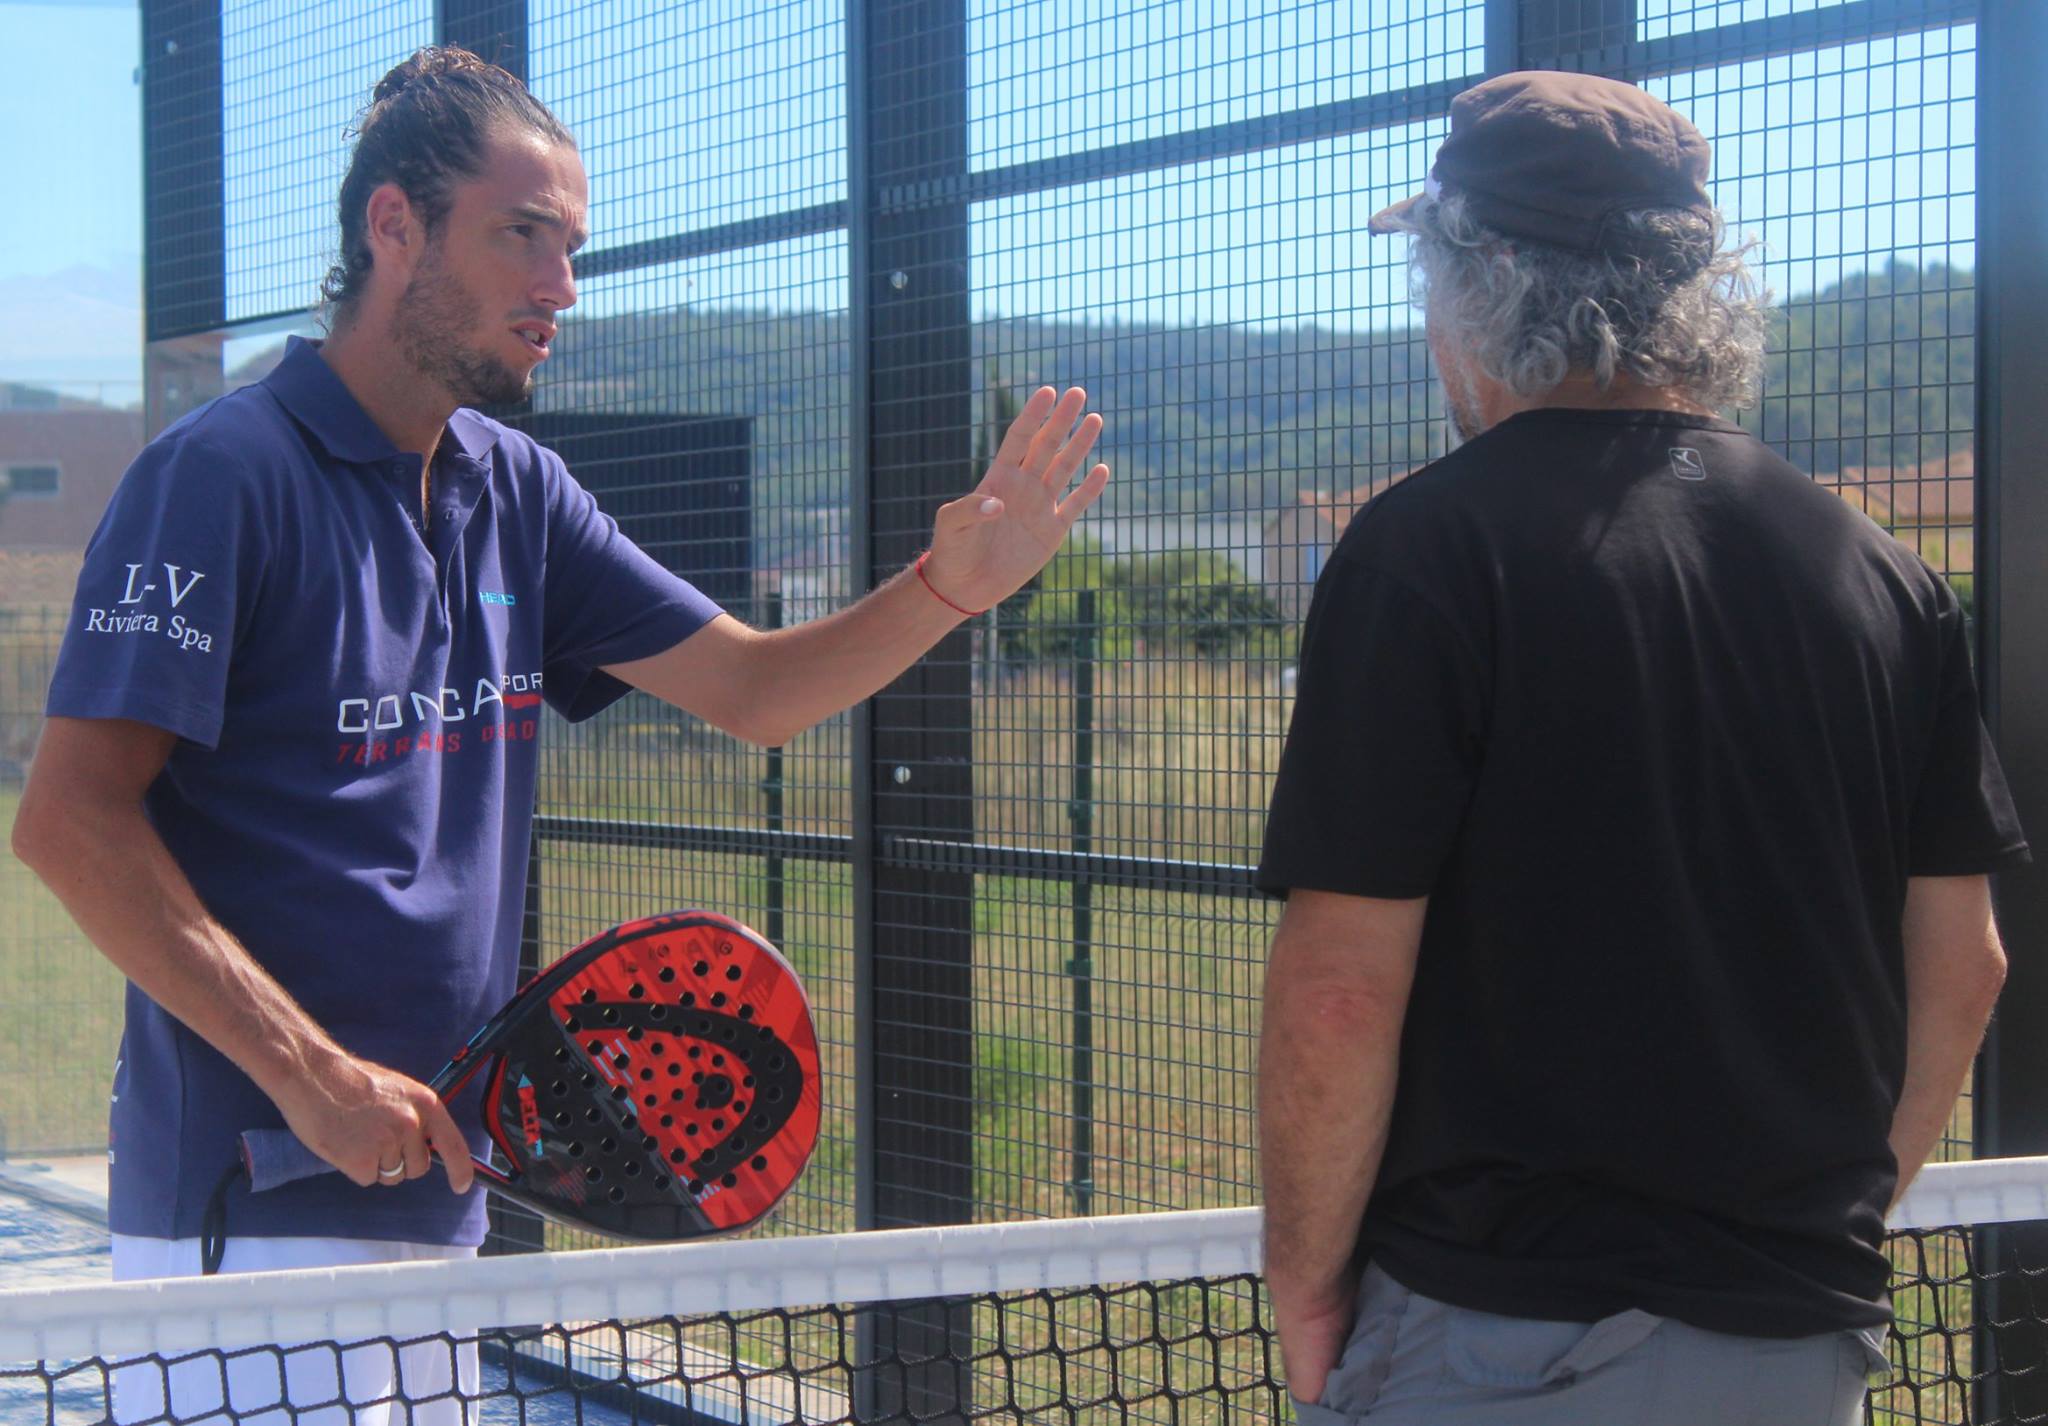 Are you looking for a teacher padel ?